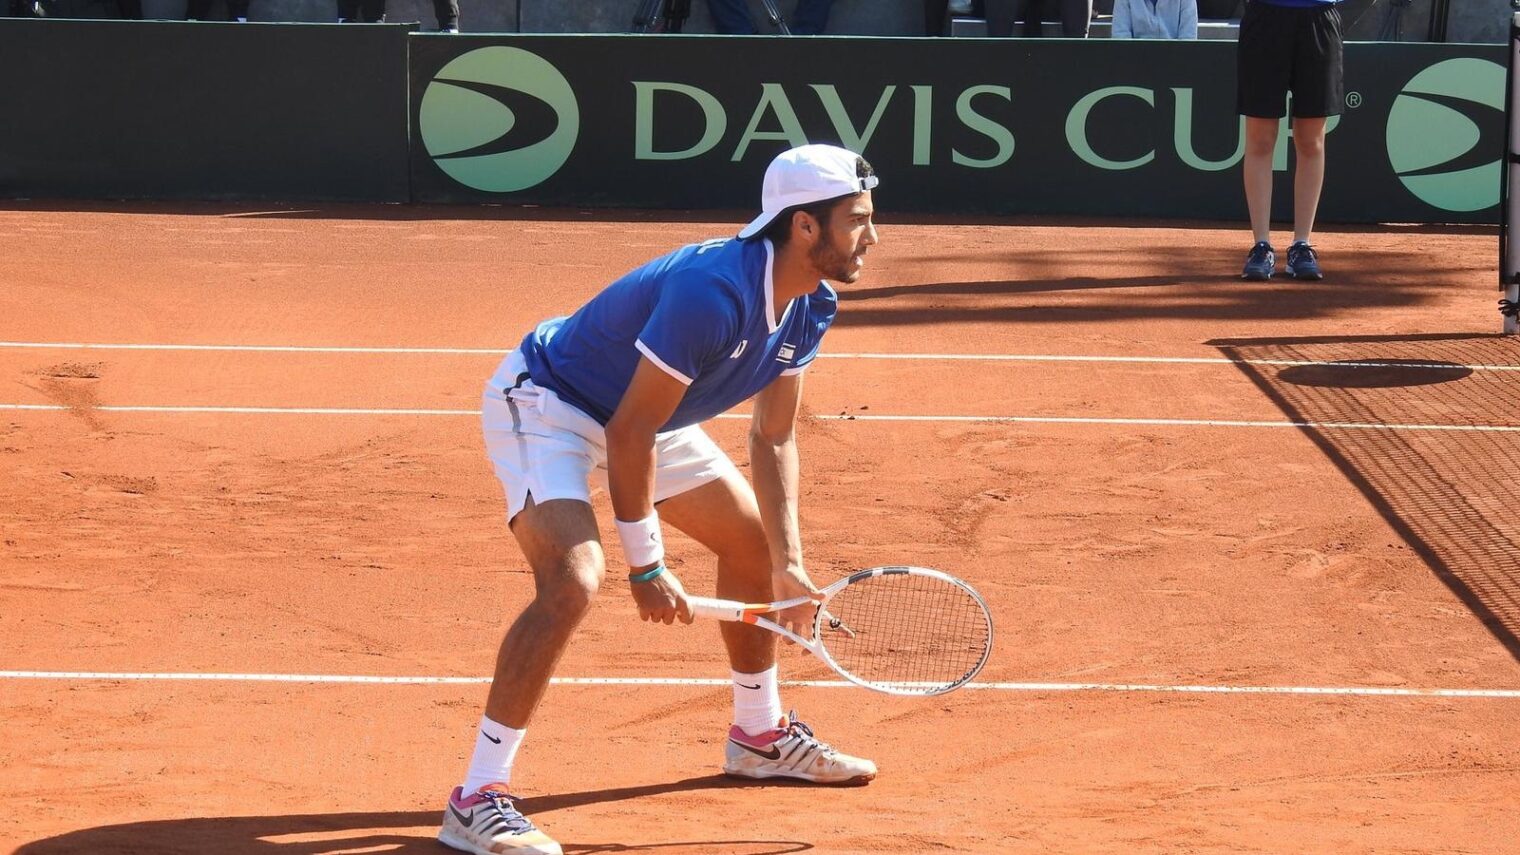 Daniel Cukierman won singles and doubles matches at the Davis Cup qualifiers in March 2020. Photo: courtesy